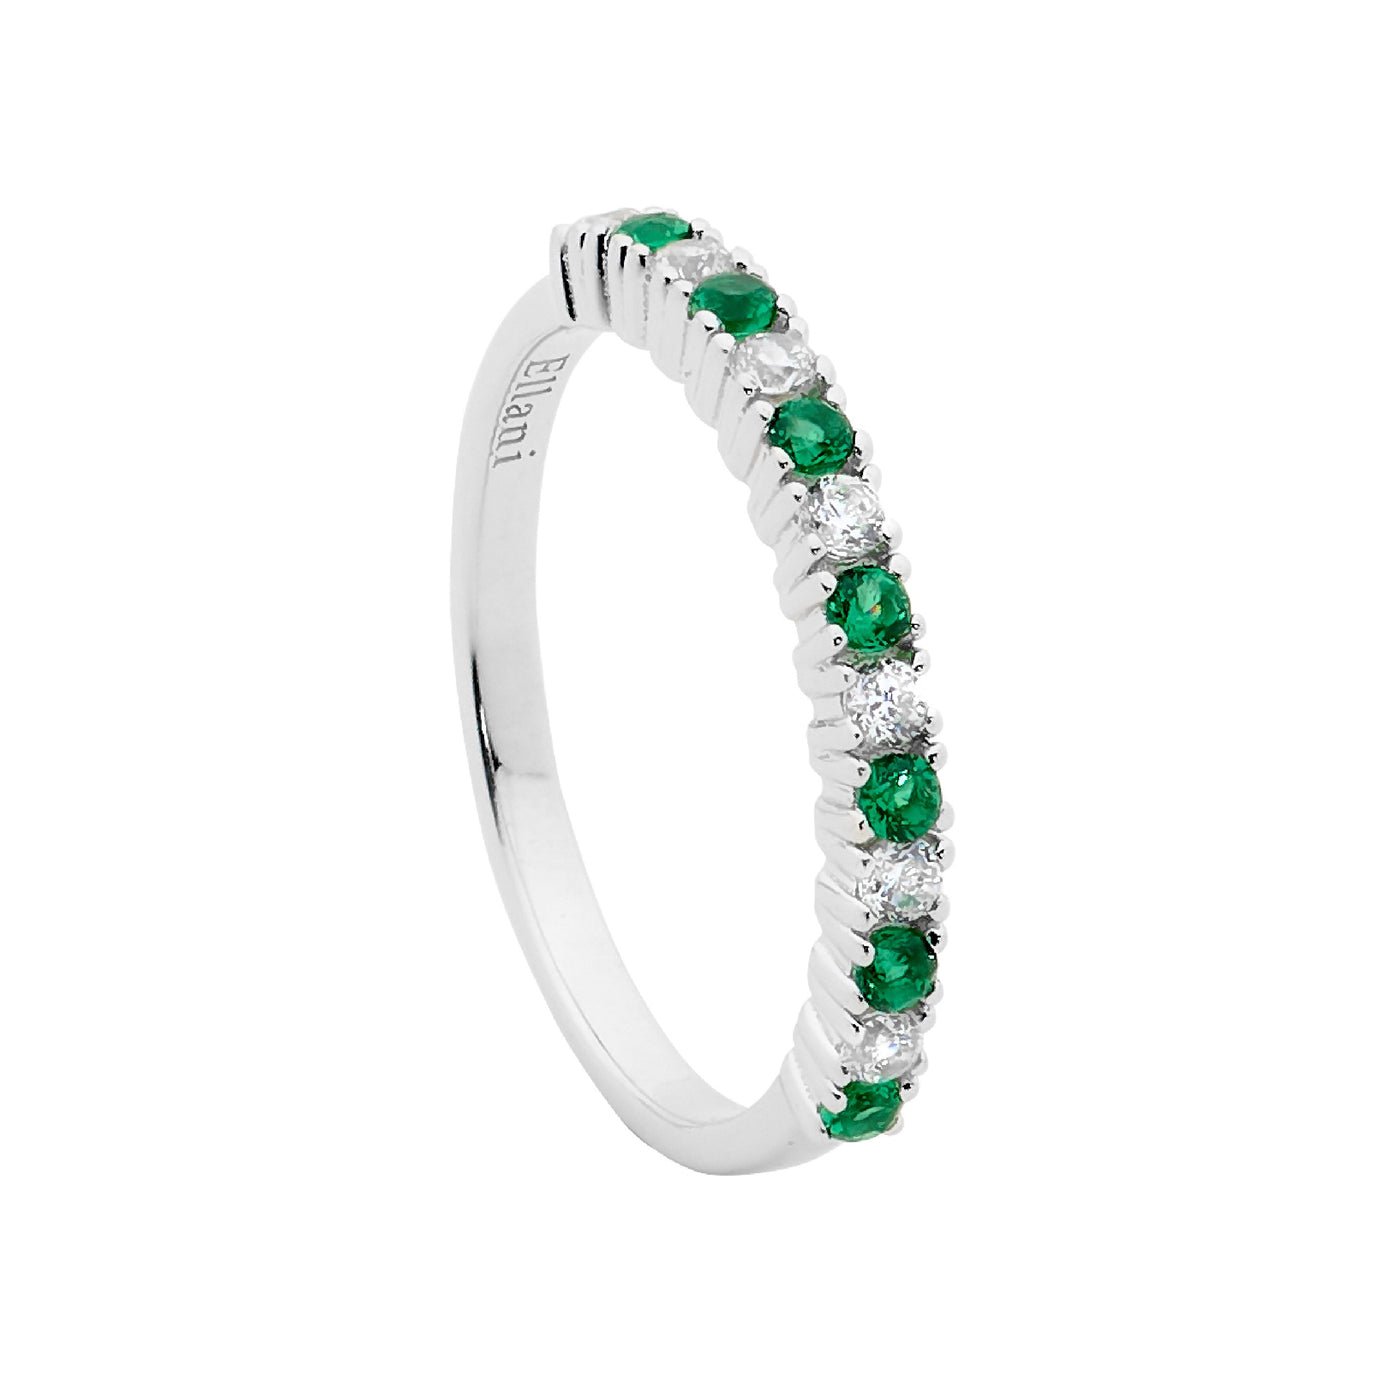 Green & White Eternity Style Ring with CZ